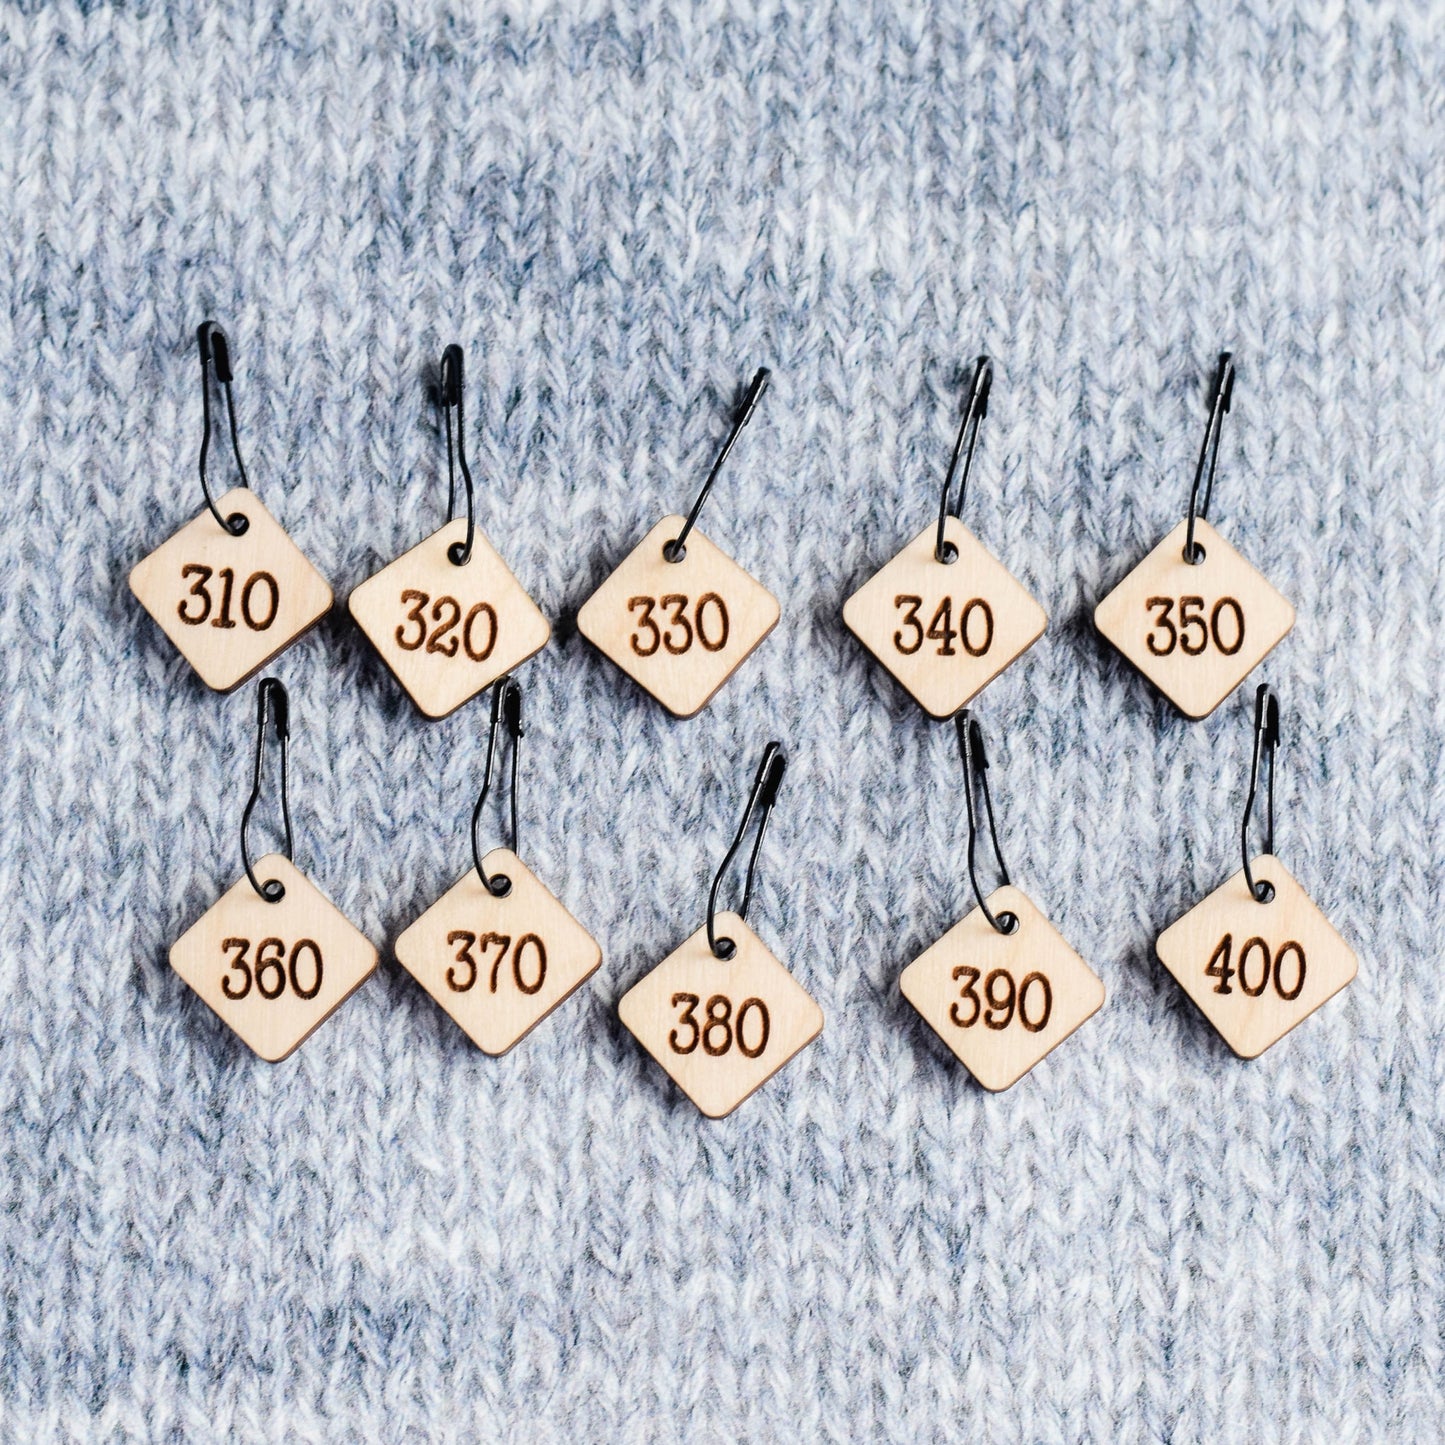 Set of 10 Removable Stitch Markers - 310-400 - Cast On Counting Numbers, Laser Engraved Wood Stitch Markers, Counting Stitch Markers - Birch